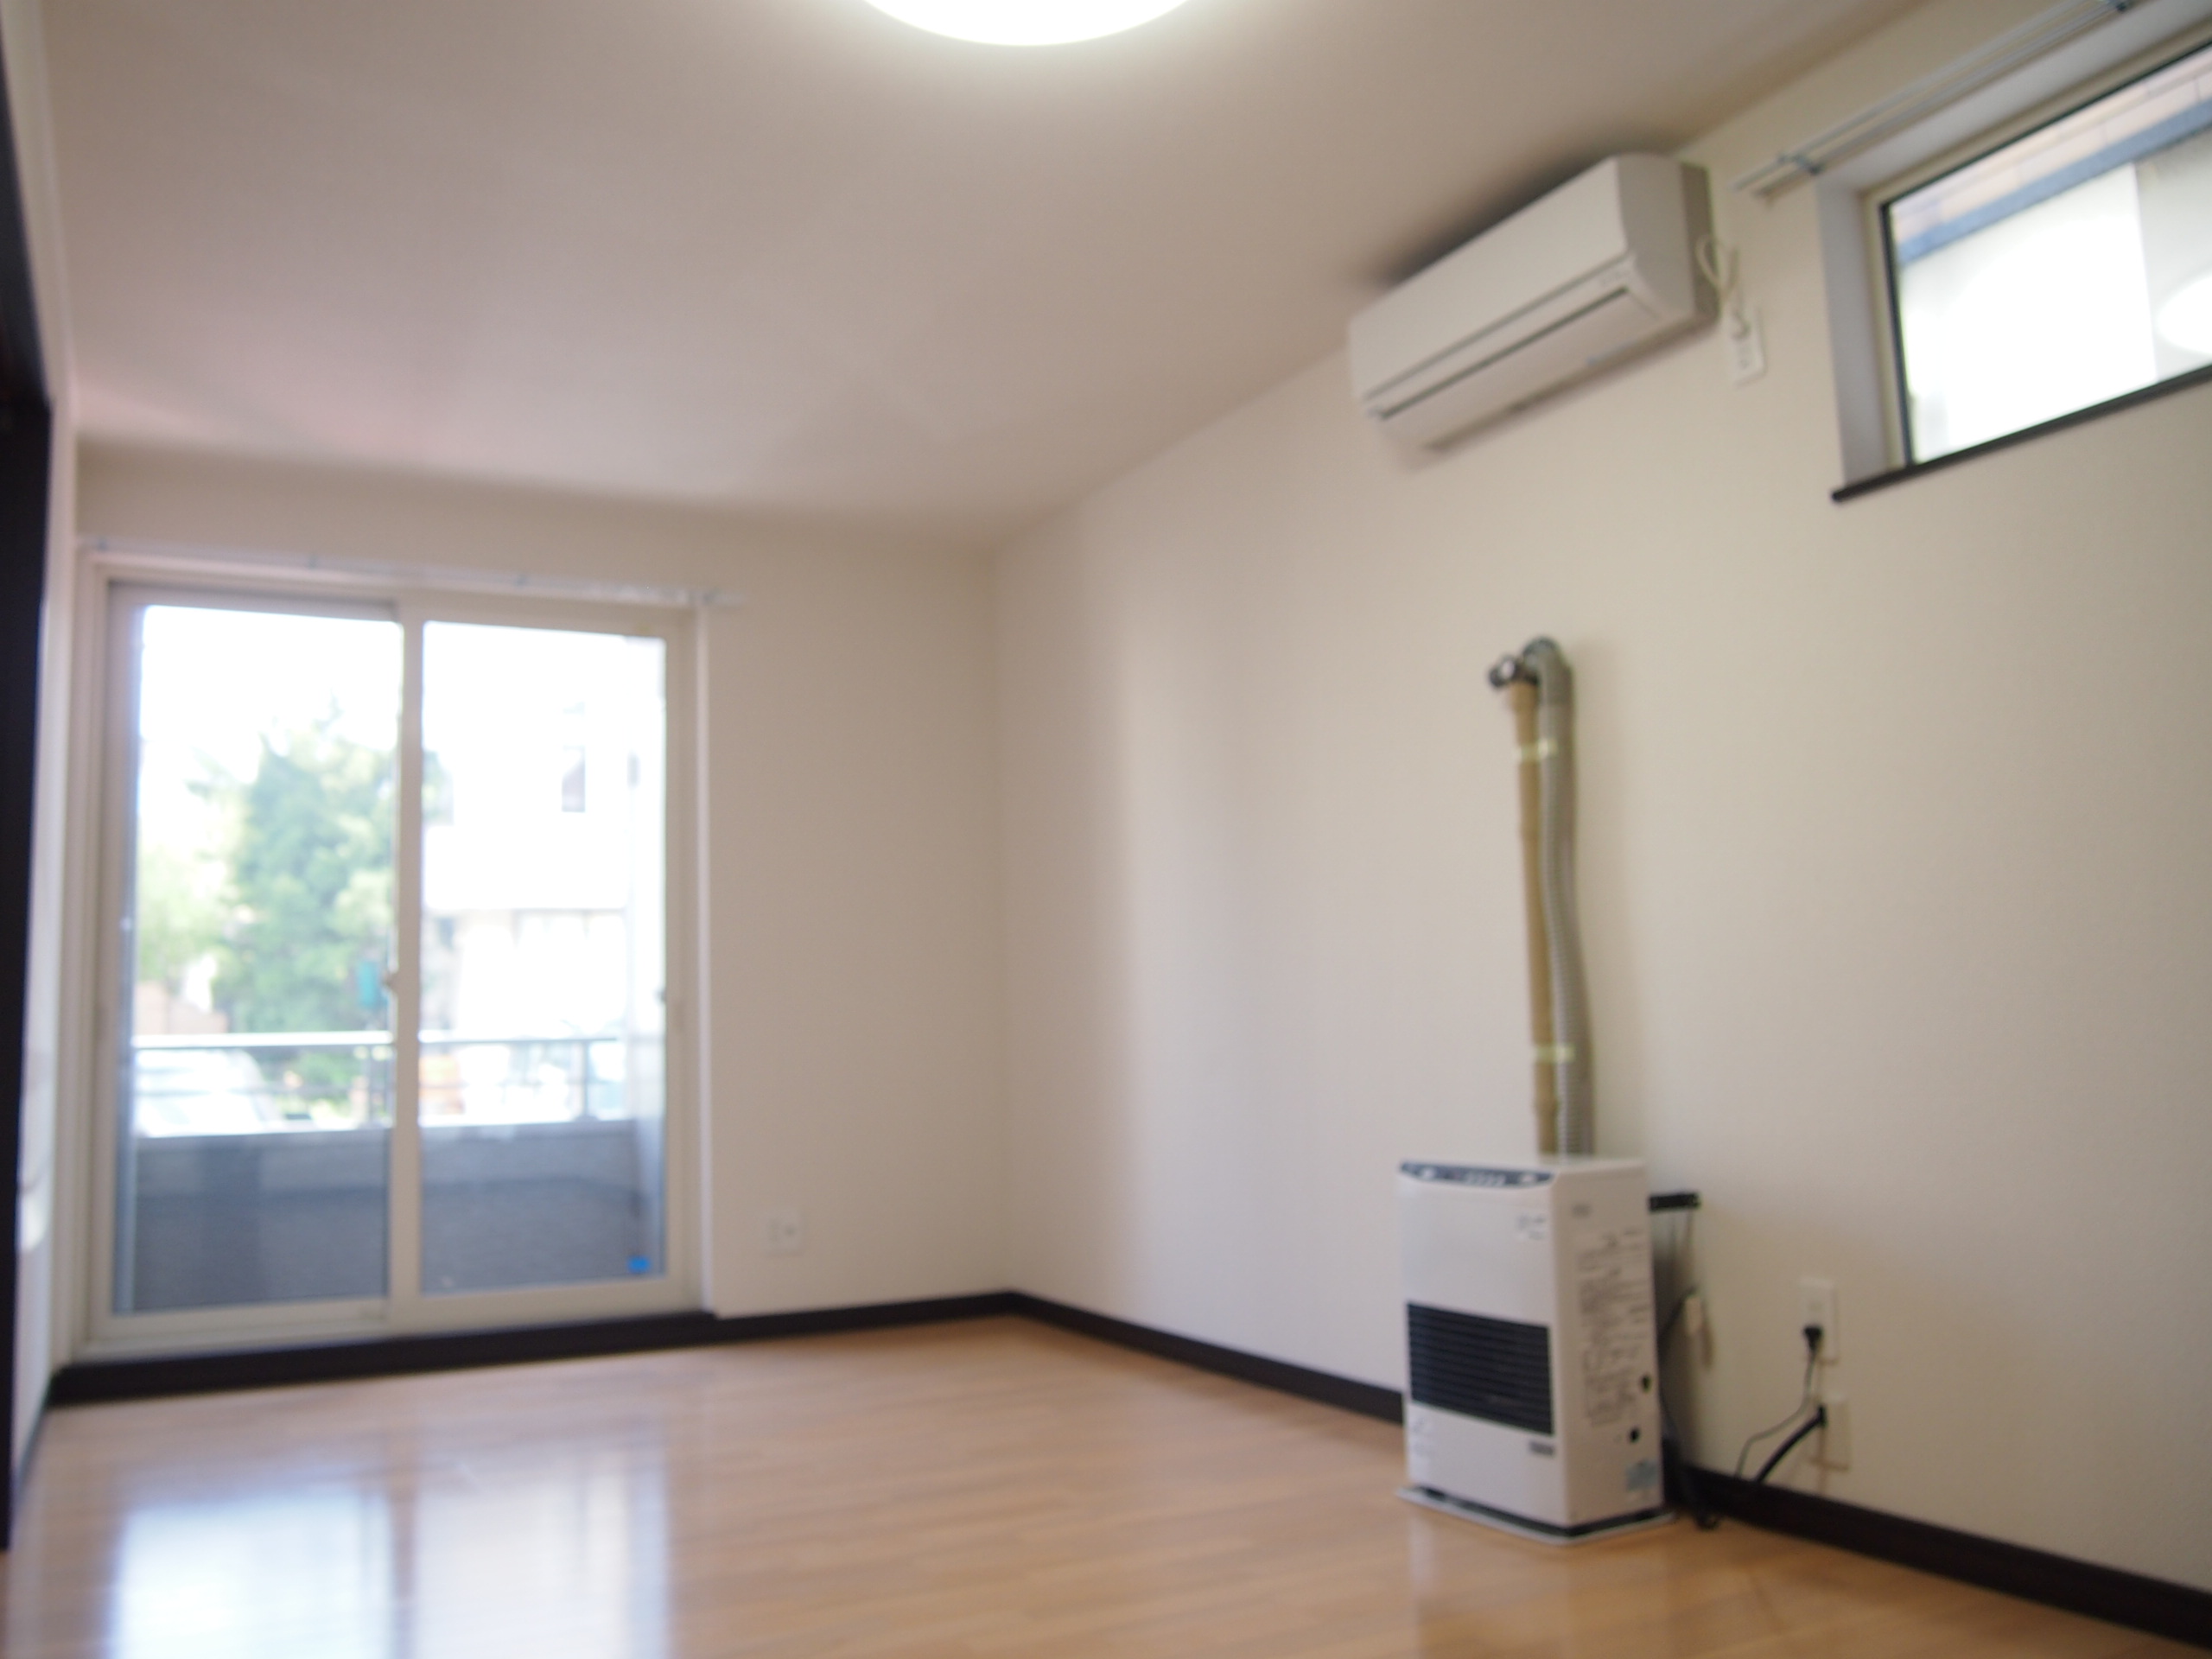 Living and room. Air conditioning and heating with a living